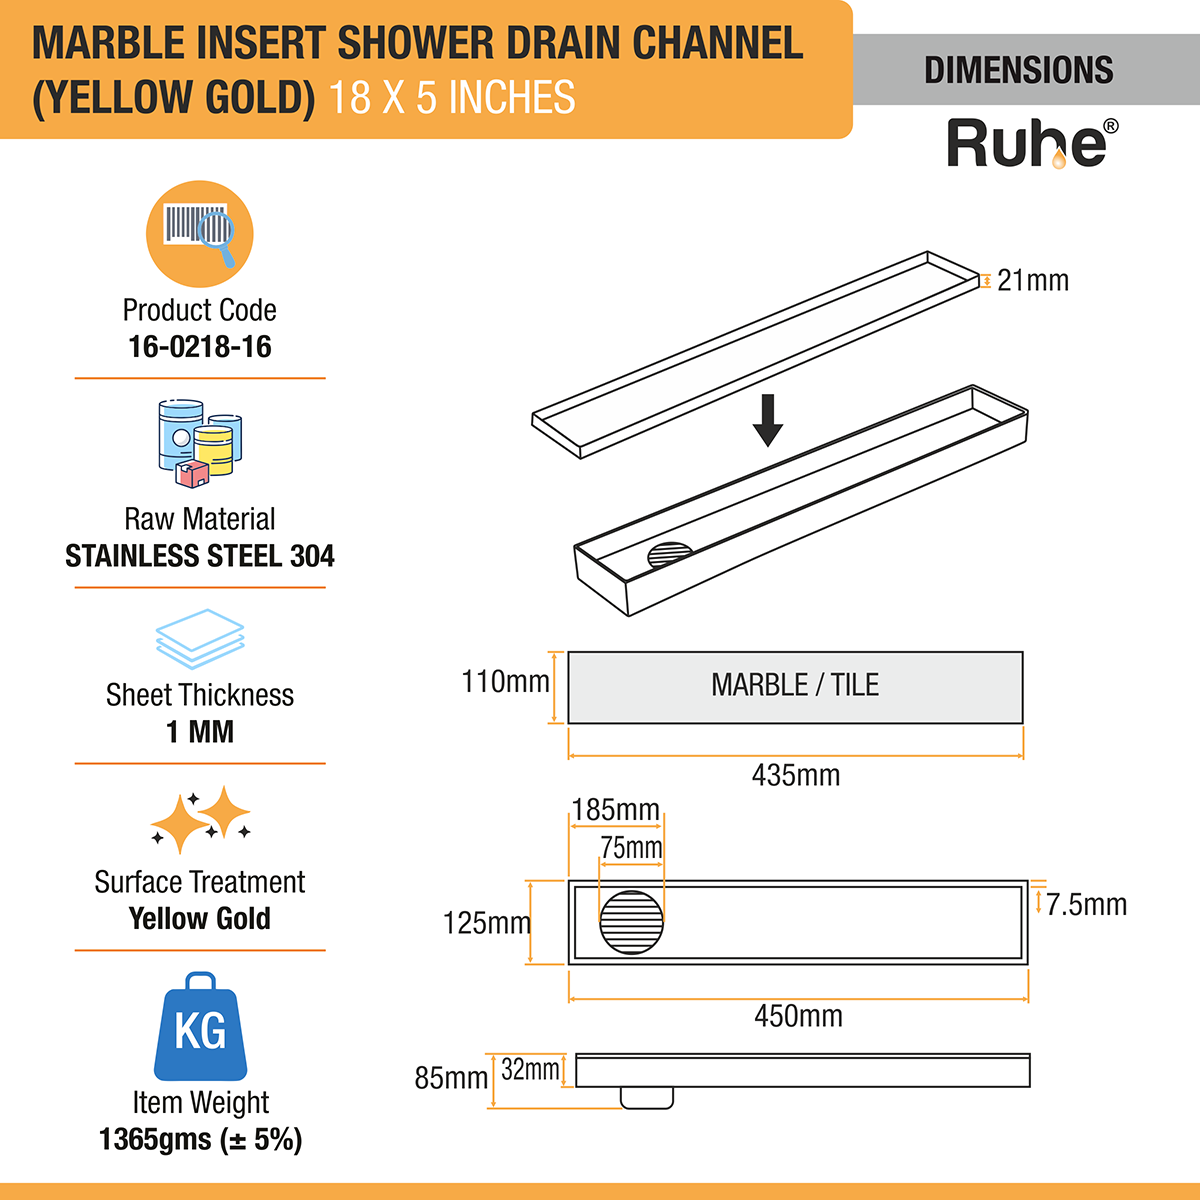 Marble Insert Shower Drain Channel (18 x 5 Inches) YELLOW GOLD PVD Coated dimensions and sizes